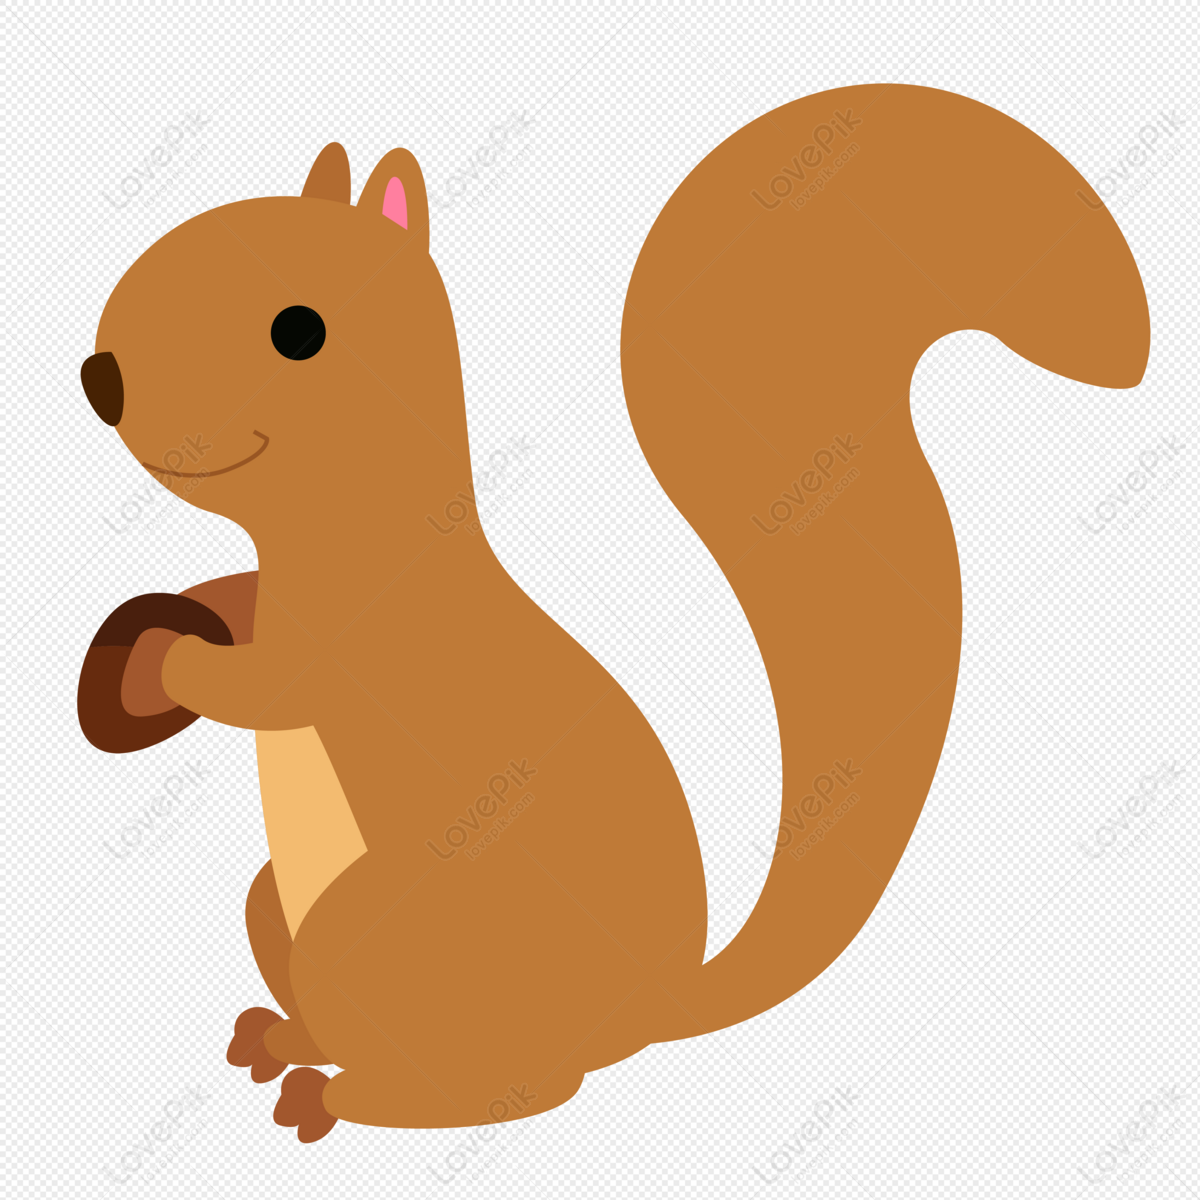 Squirrel Animal Cartoon Squirrel PNG Image Free Download And Clipart Image  For Free Download - Lovepik | 401422781